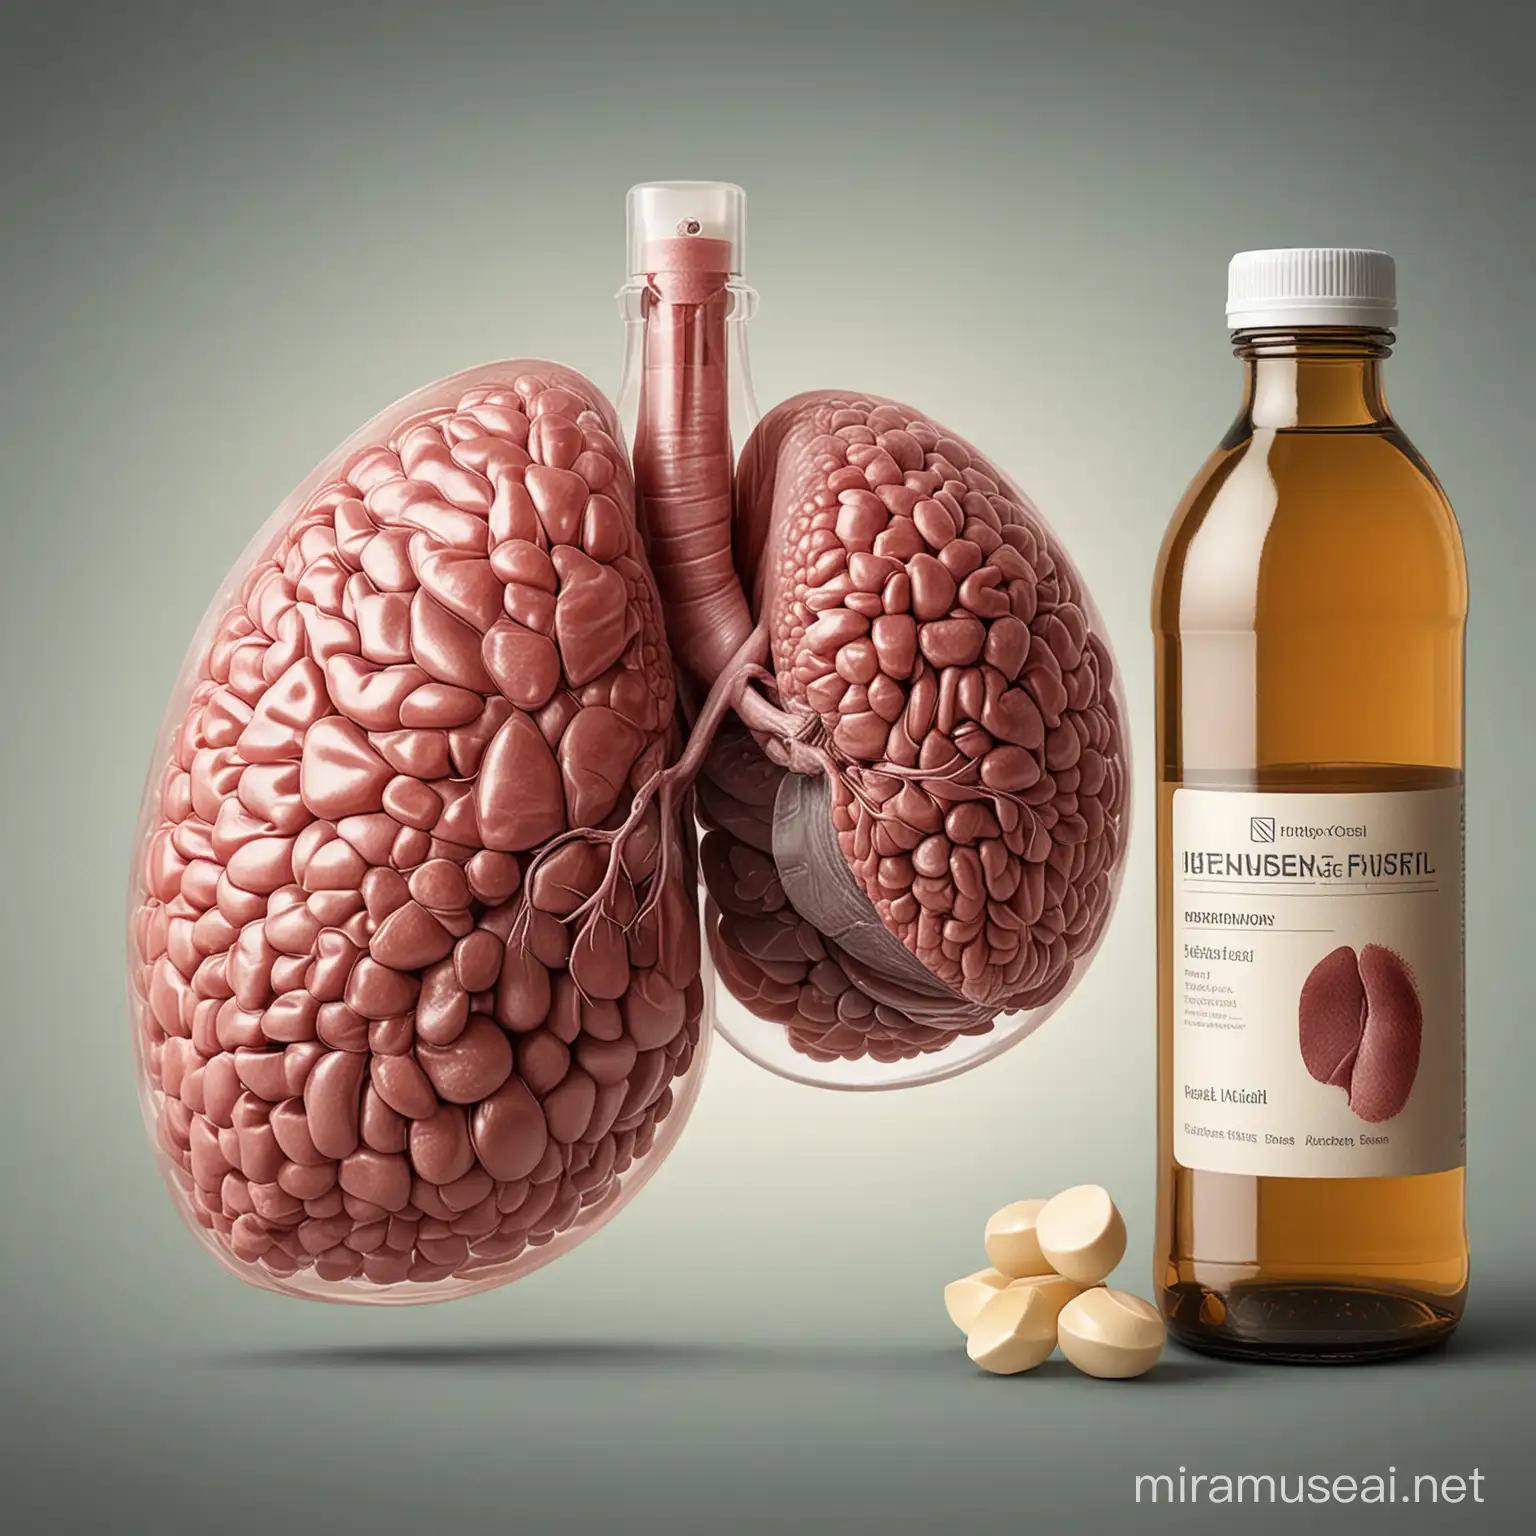 A detailed medical illustration showing the internal organs of the abdomen. The liver is prominently featured and appears healthy and intact. Surrounding the liver is a translucent shield or guard for protective purposes. Nearby is an empty glass bottle on its side labeled with the name of a nutraceutical product claimed to support liver function and health. The image should have a calm, professional and factual tone befitting medical illustration.